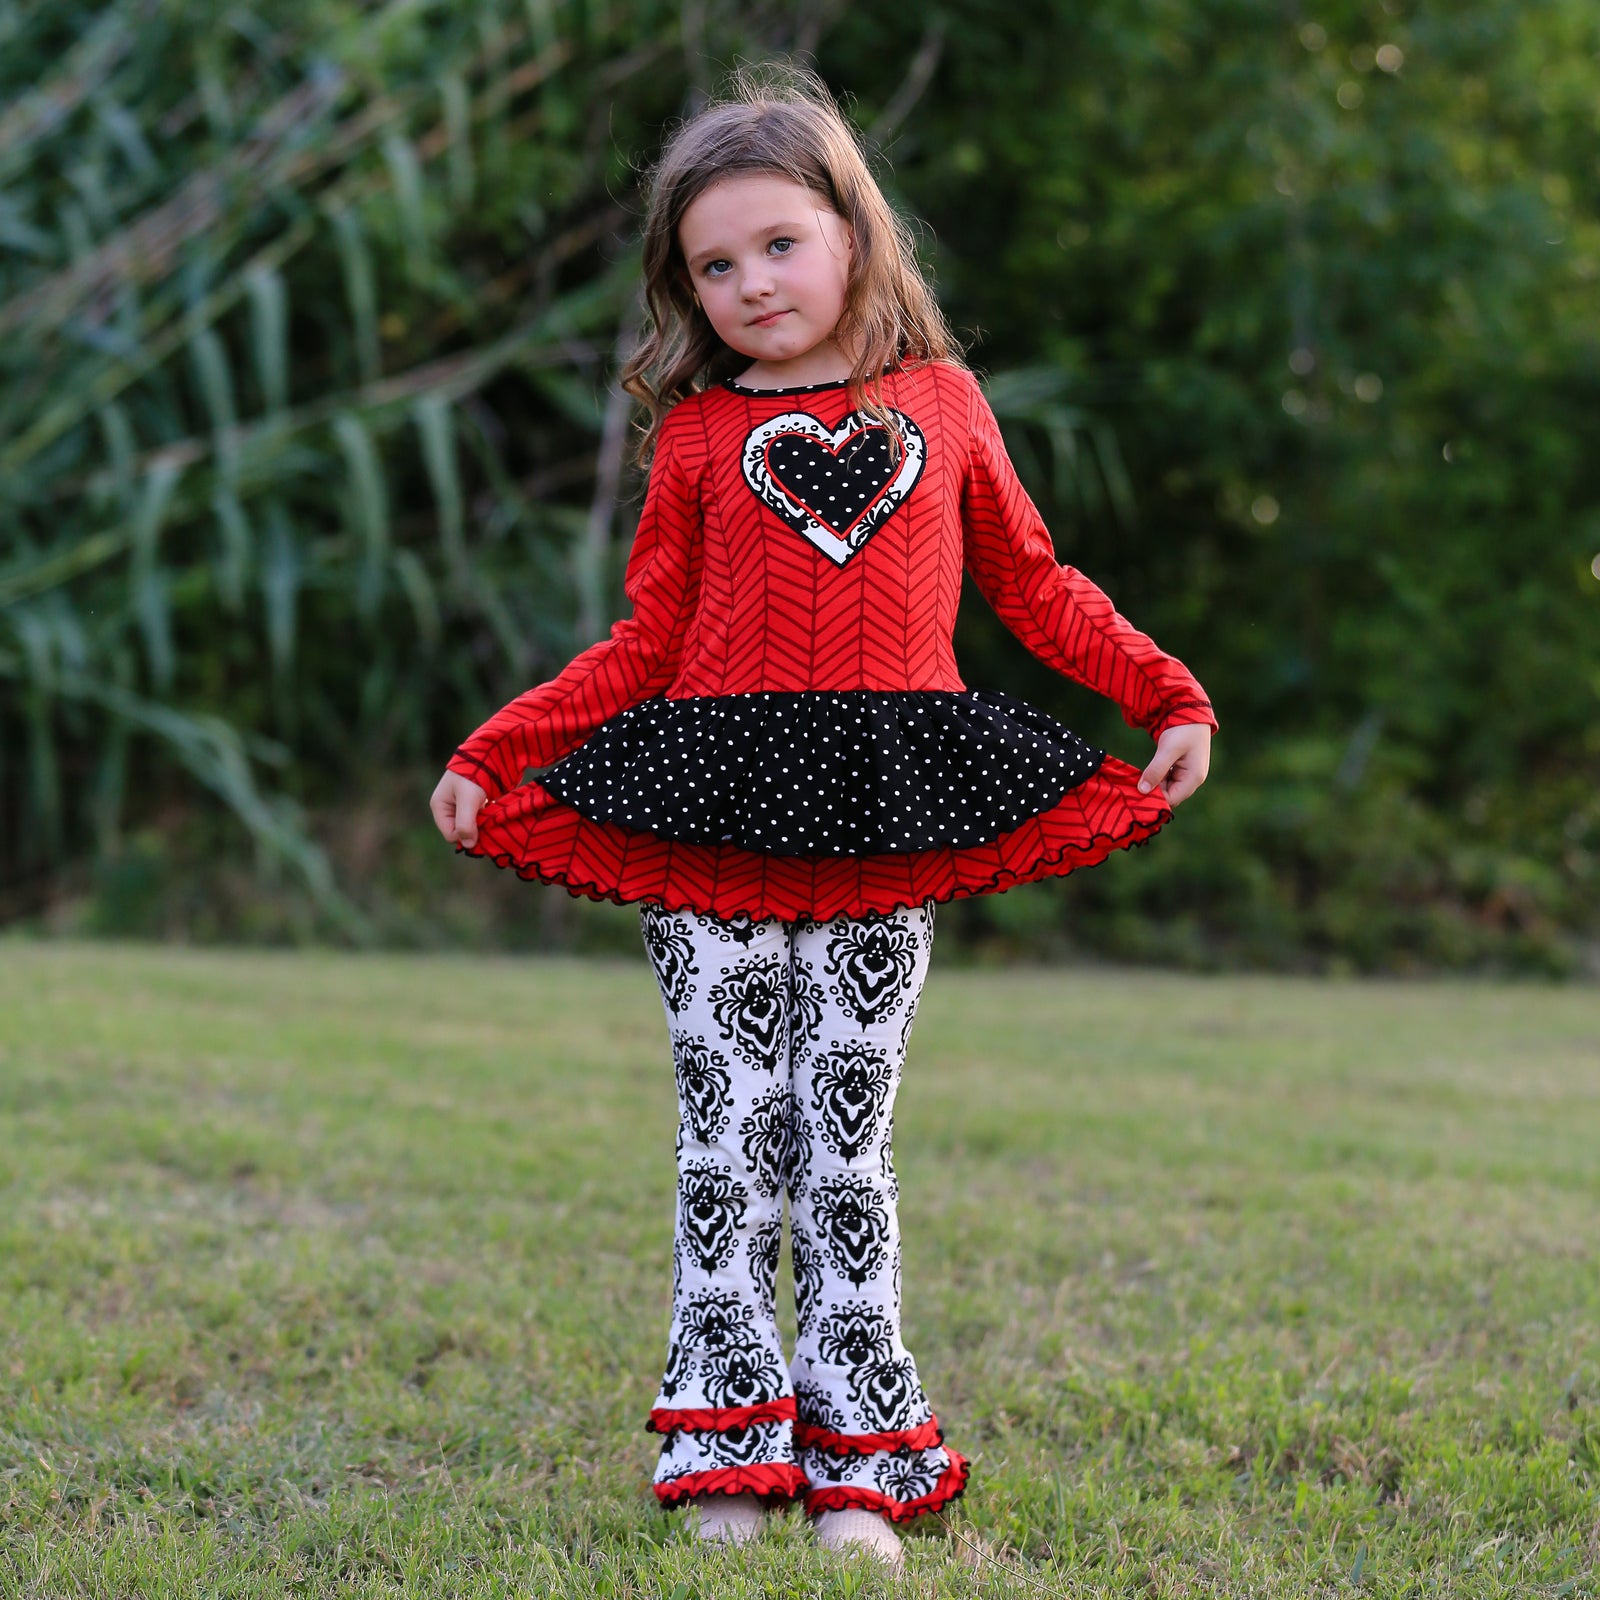 Winter Damask Holiday Heart Polka Dots Girls Tunic and Legging Set for Sizes 2/3T-9/10 by AnnLoren